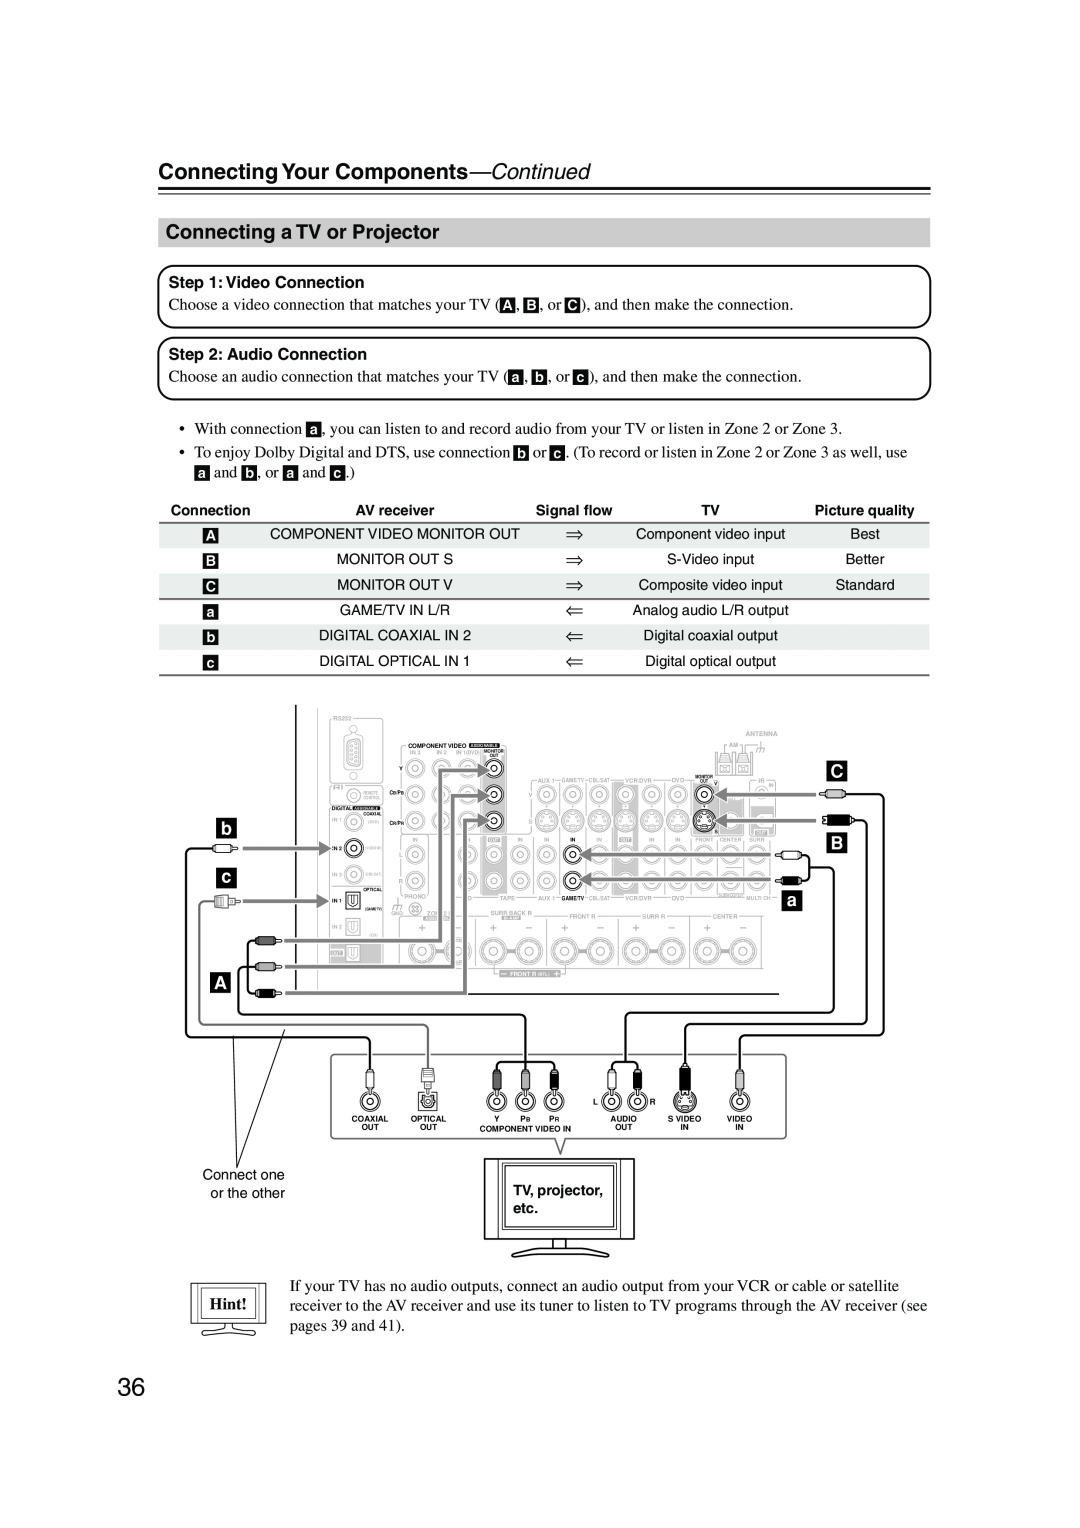 Onkyo TX-NR905 instruction manual Connecting a TV or Projector, Connecting Your Components—Continued, Hint 